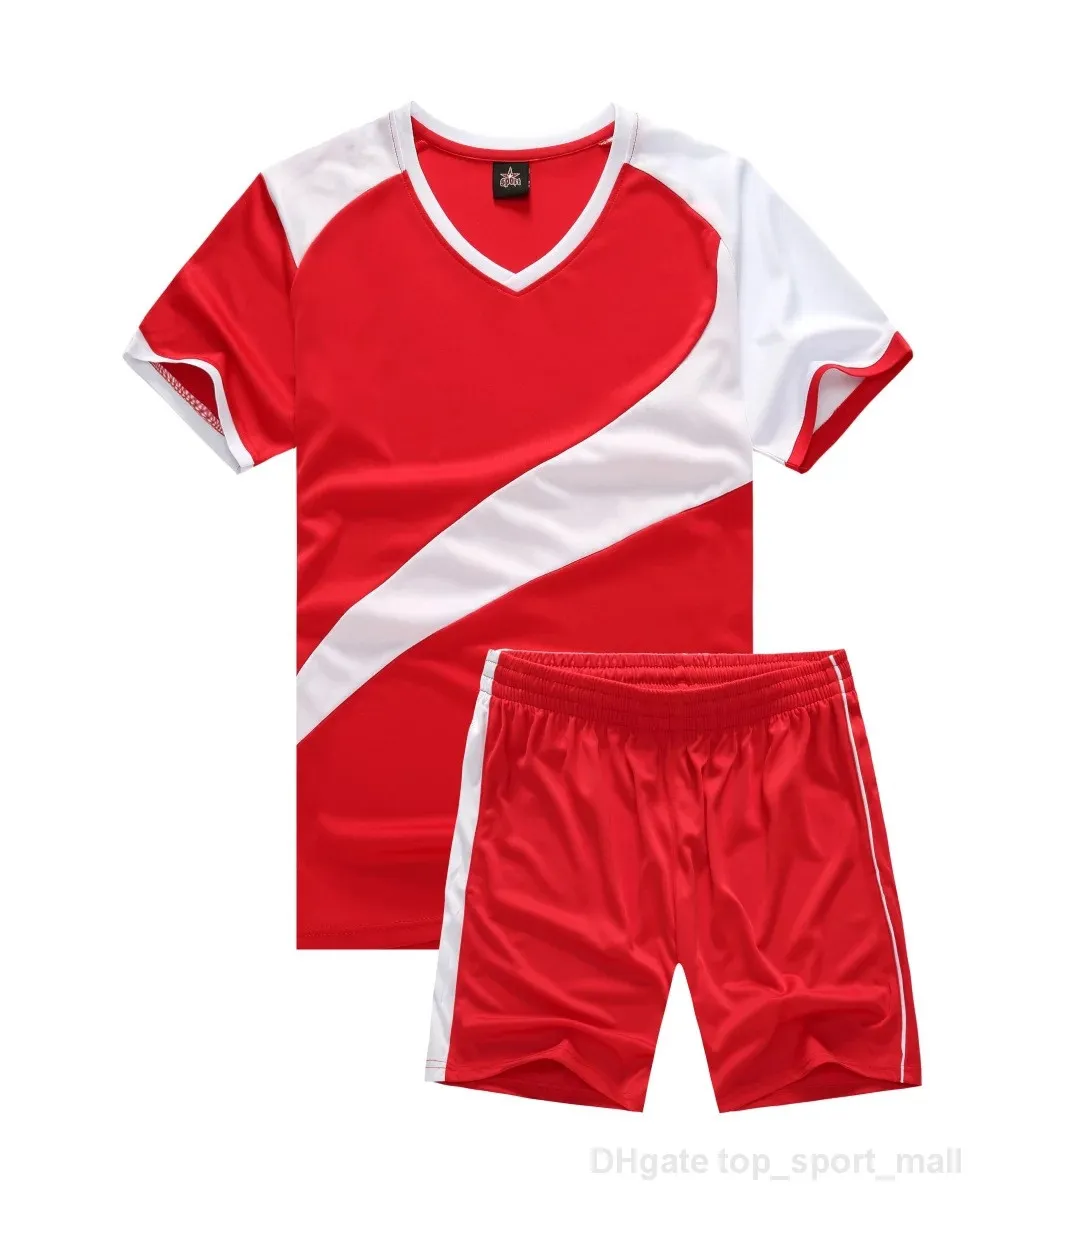 Fotboll Jersey Football Kits Color Blue White Black Red 258562447